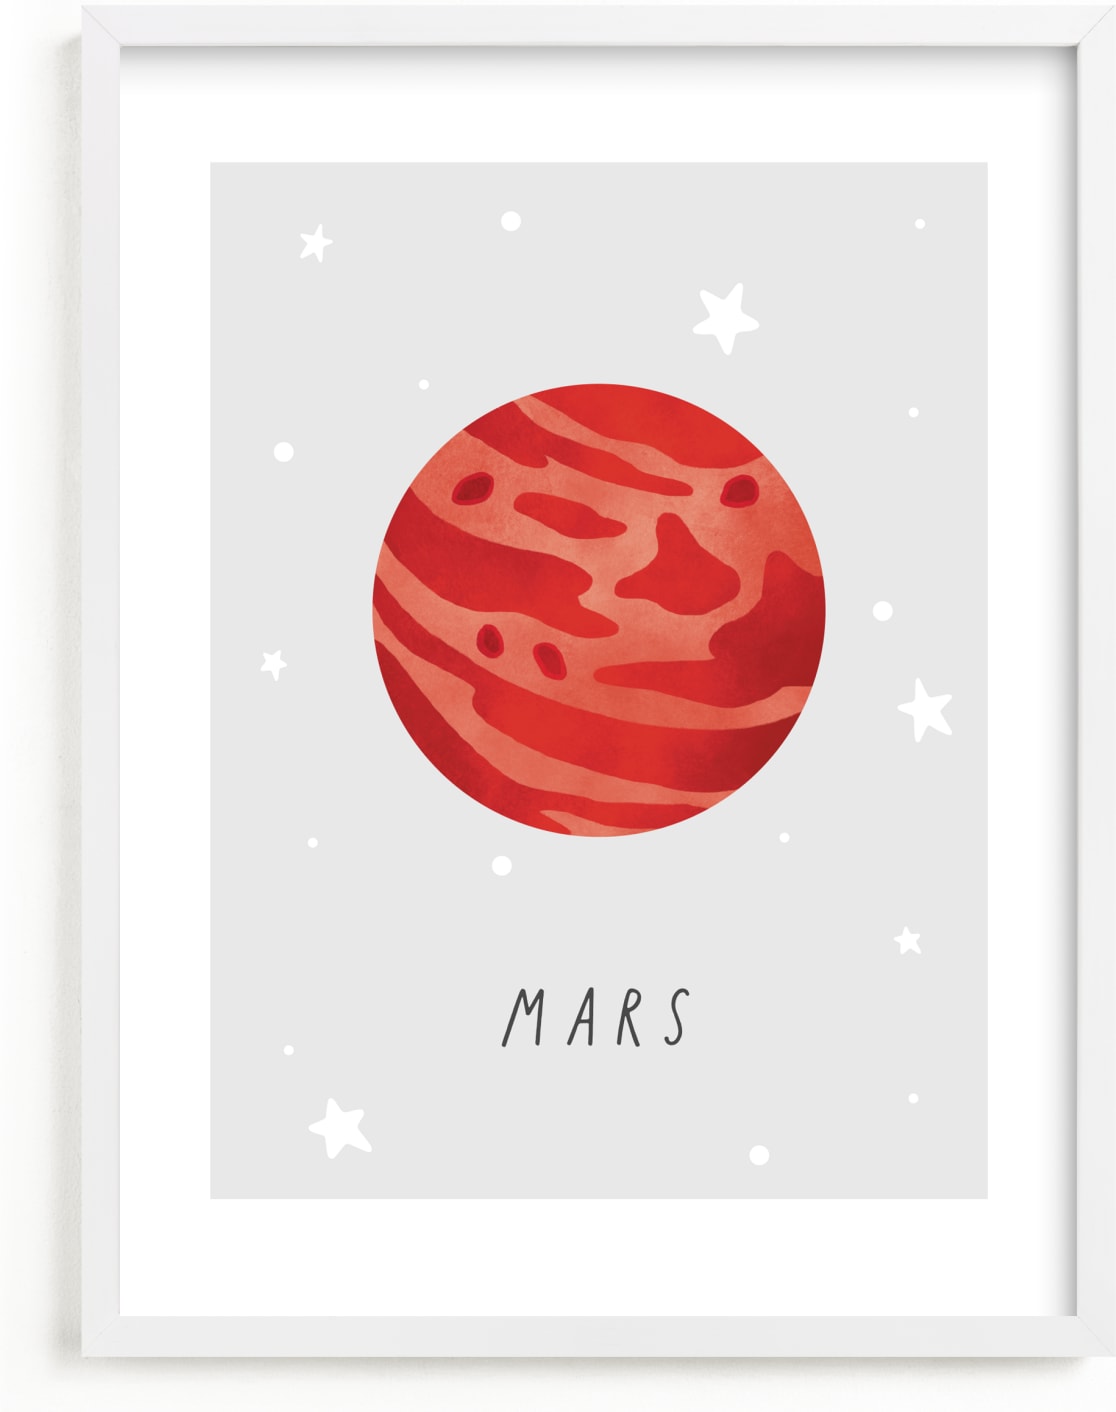 This is a white art by Elly called Solar System VI (Mars).